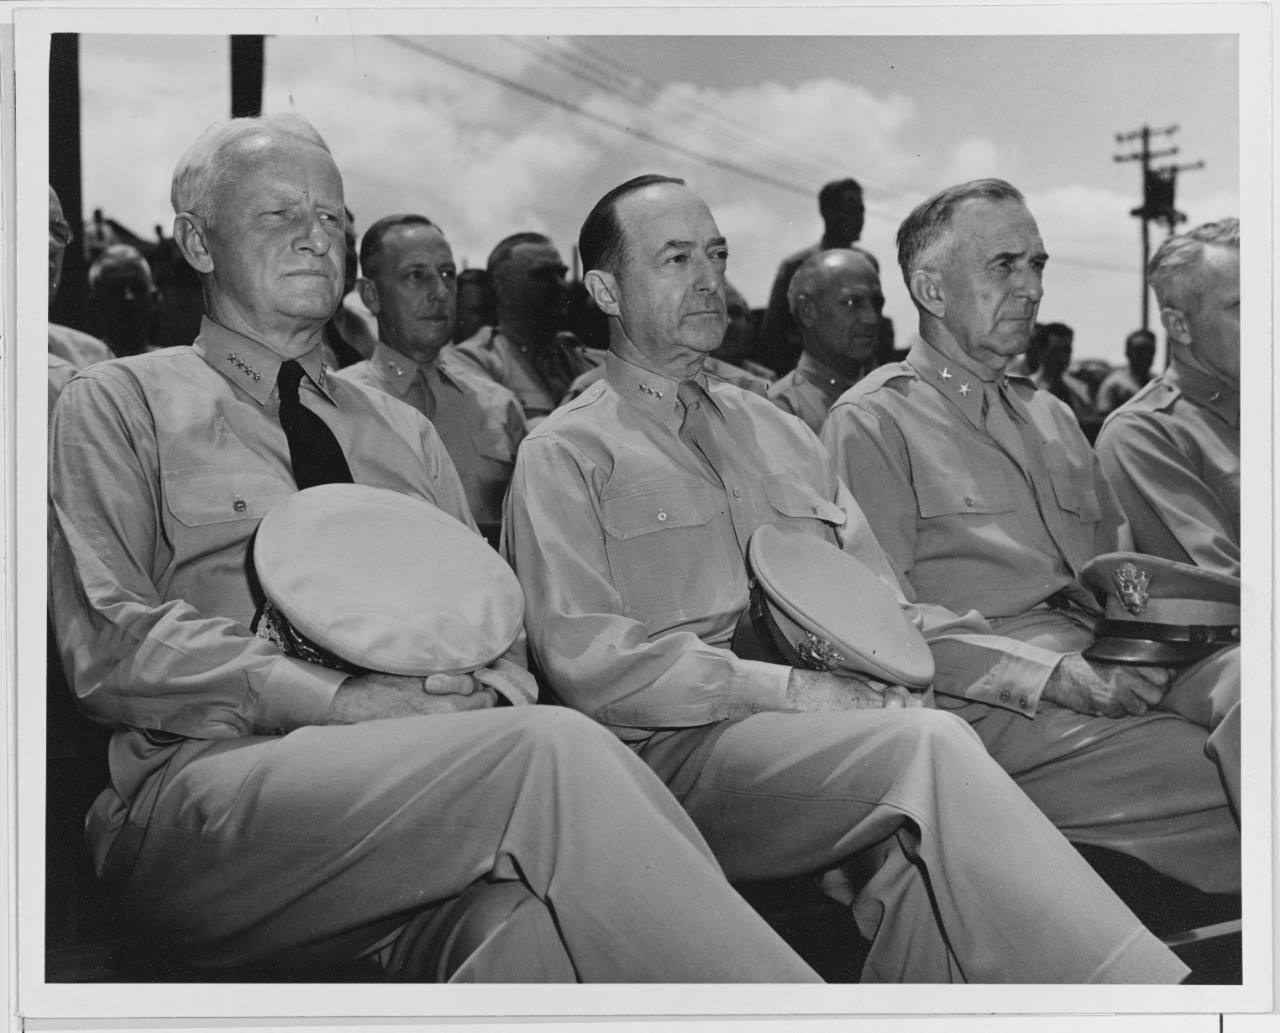 Admiral Nimitz and Other Senior Officers Attend a Memorial Service